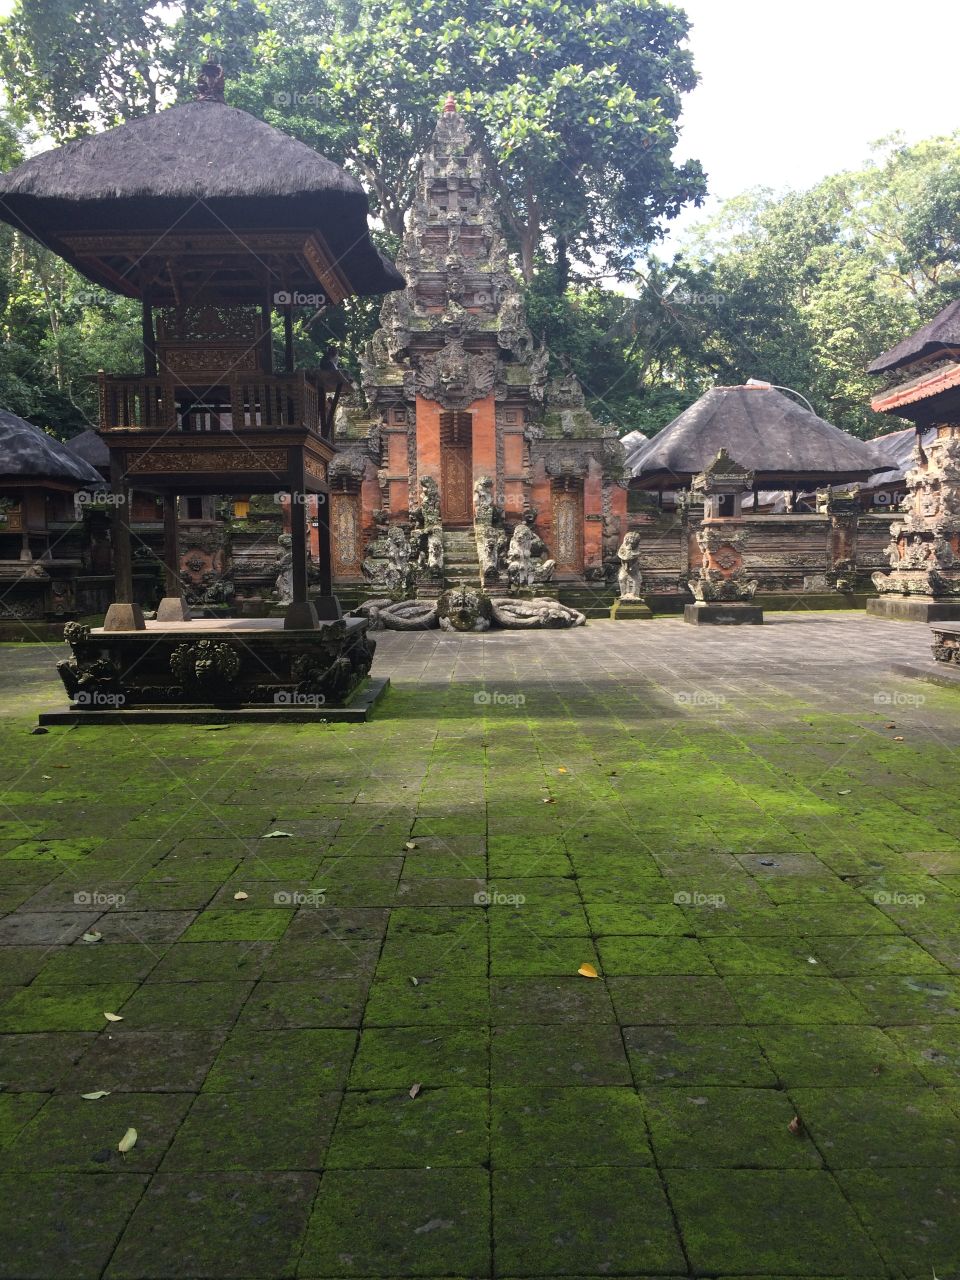 Temple at the Ubud Monkey Forest